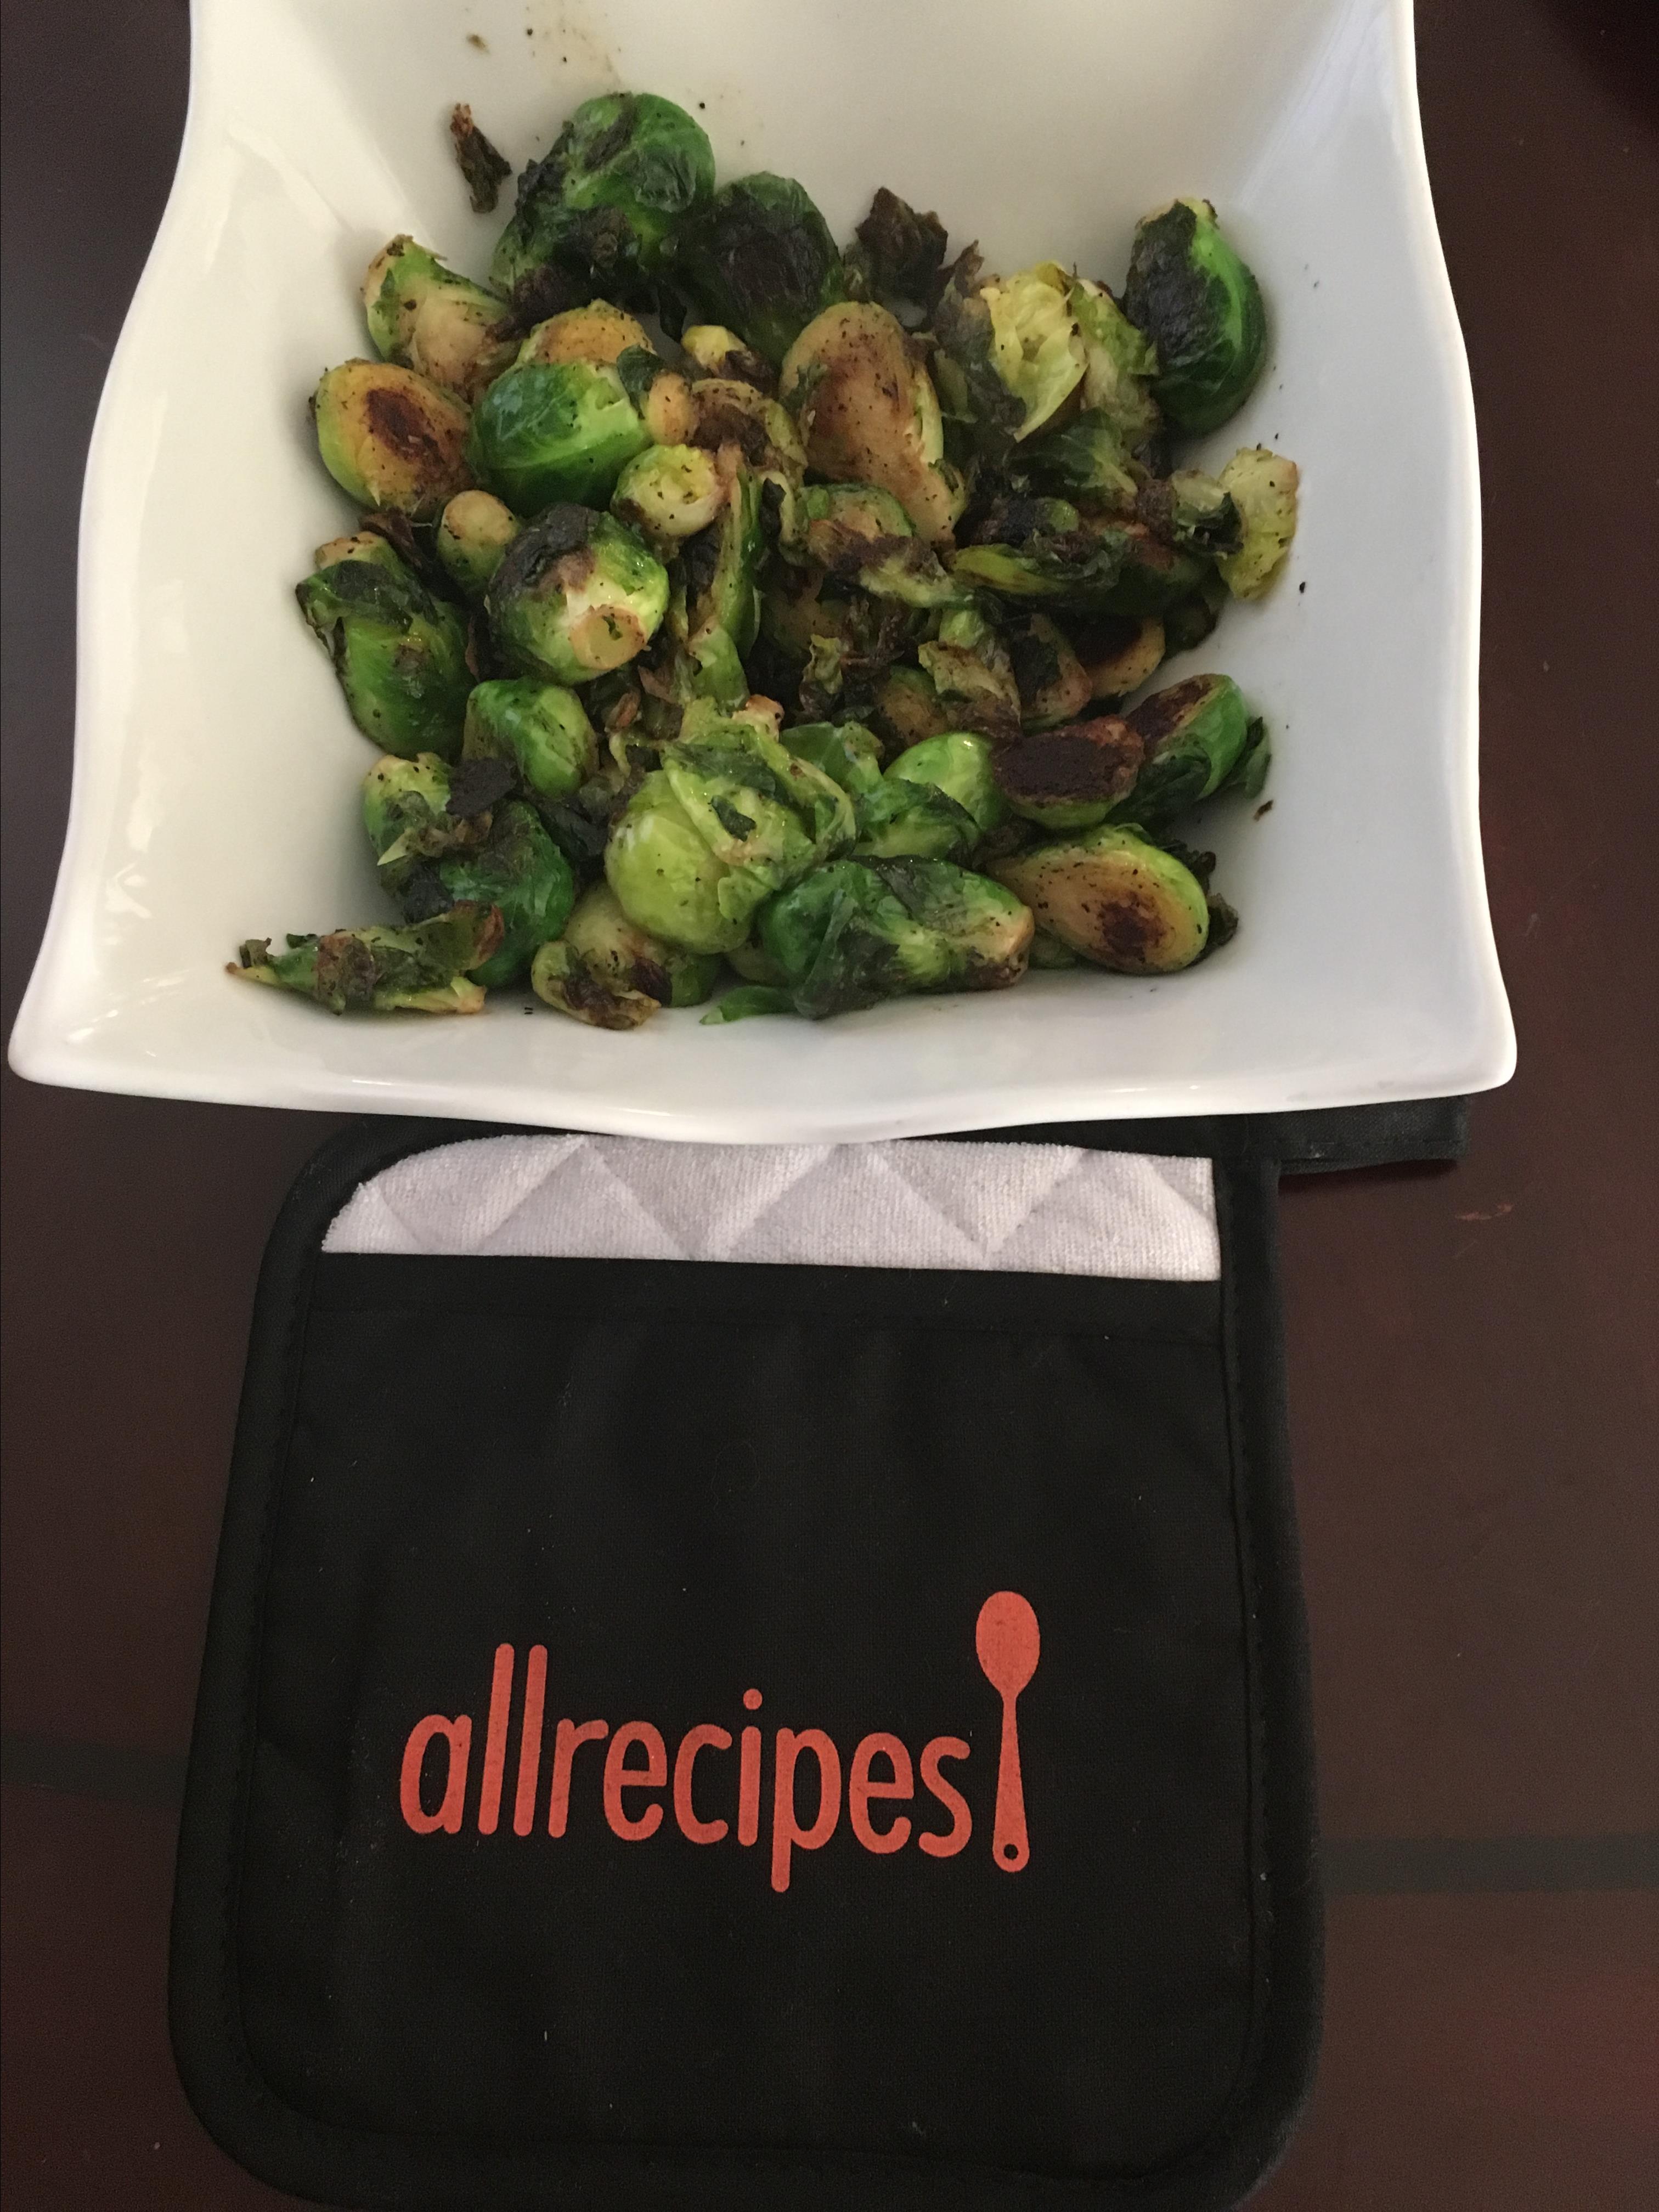 KISS: Keep it Simple (Brussels) Sprouts 